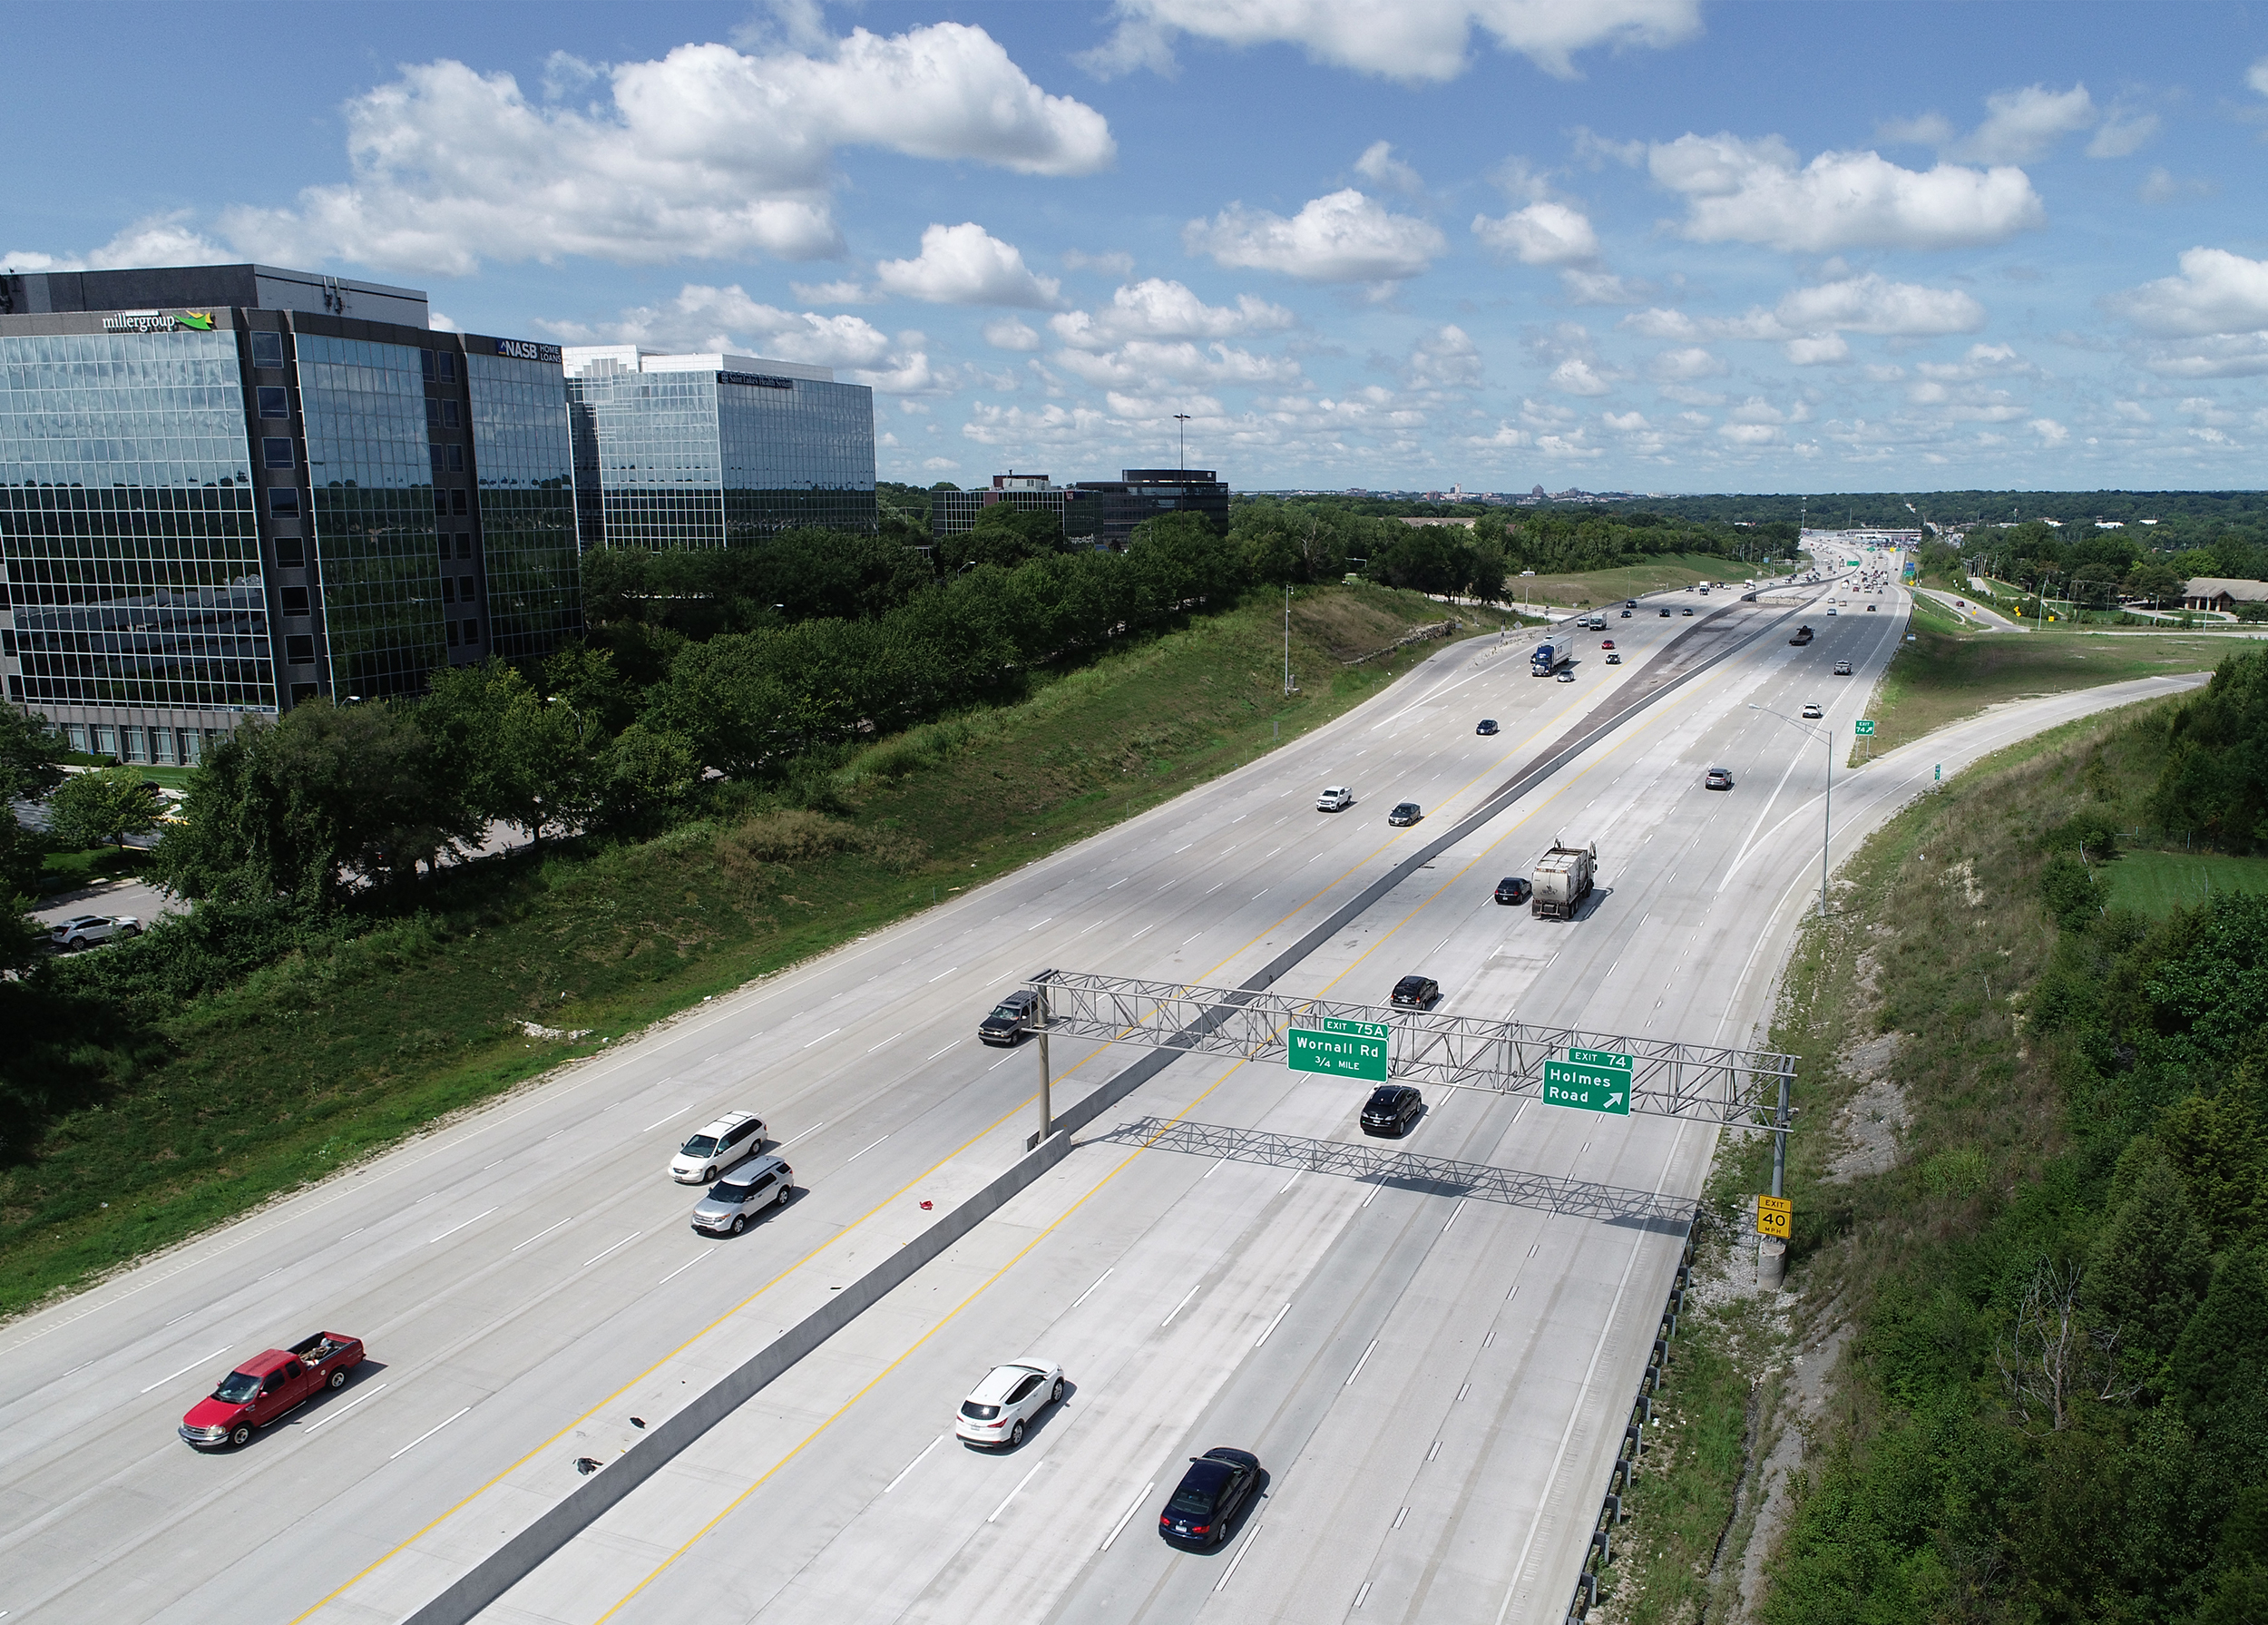 Wilson & Company teamed with Radmacher Brothers Excavation Company to perform a widening and concrete overlay on 3.5 miles of I-435 in Kansas City, MO.